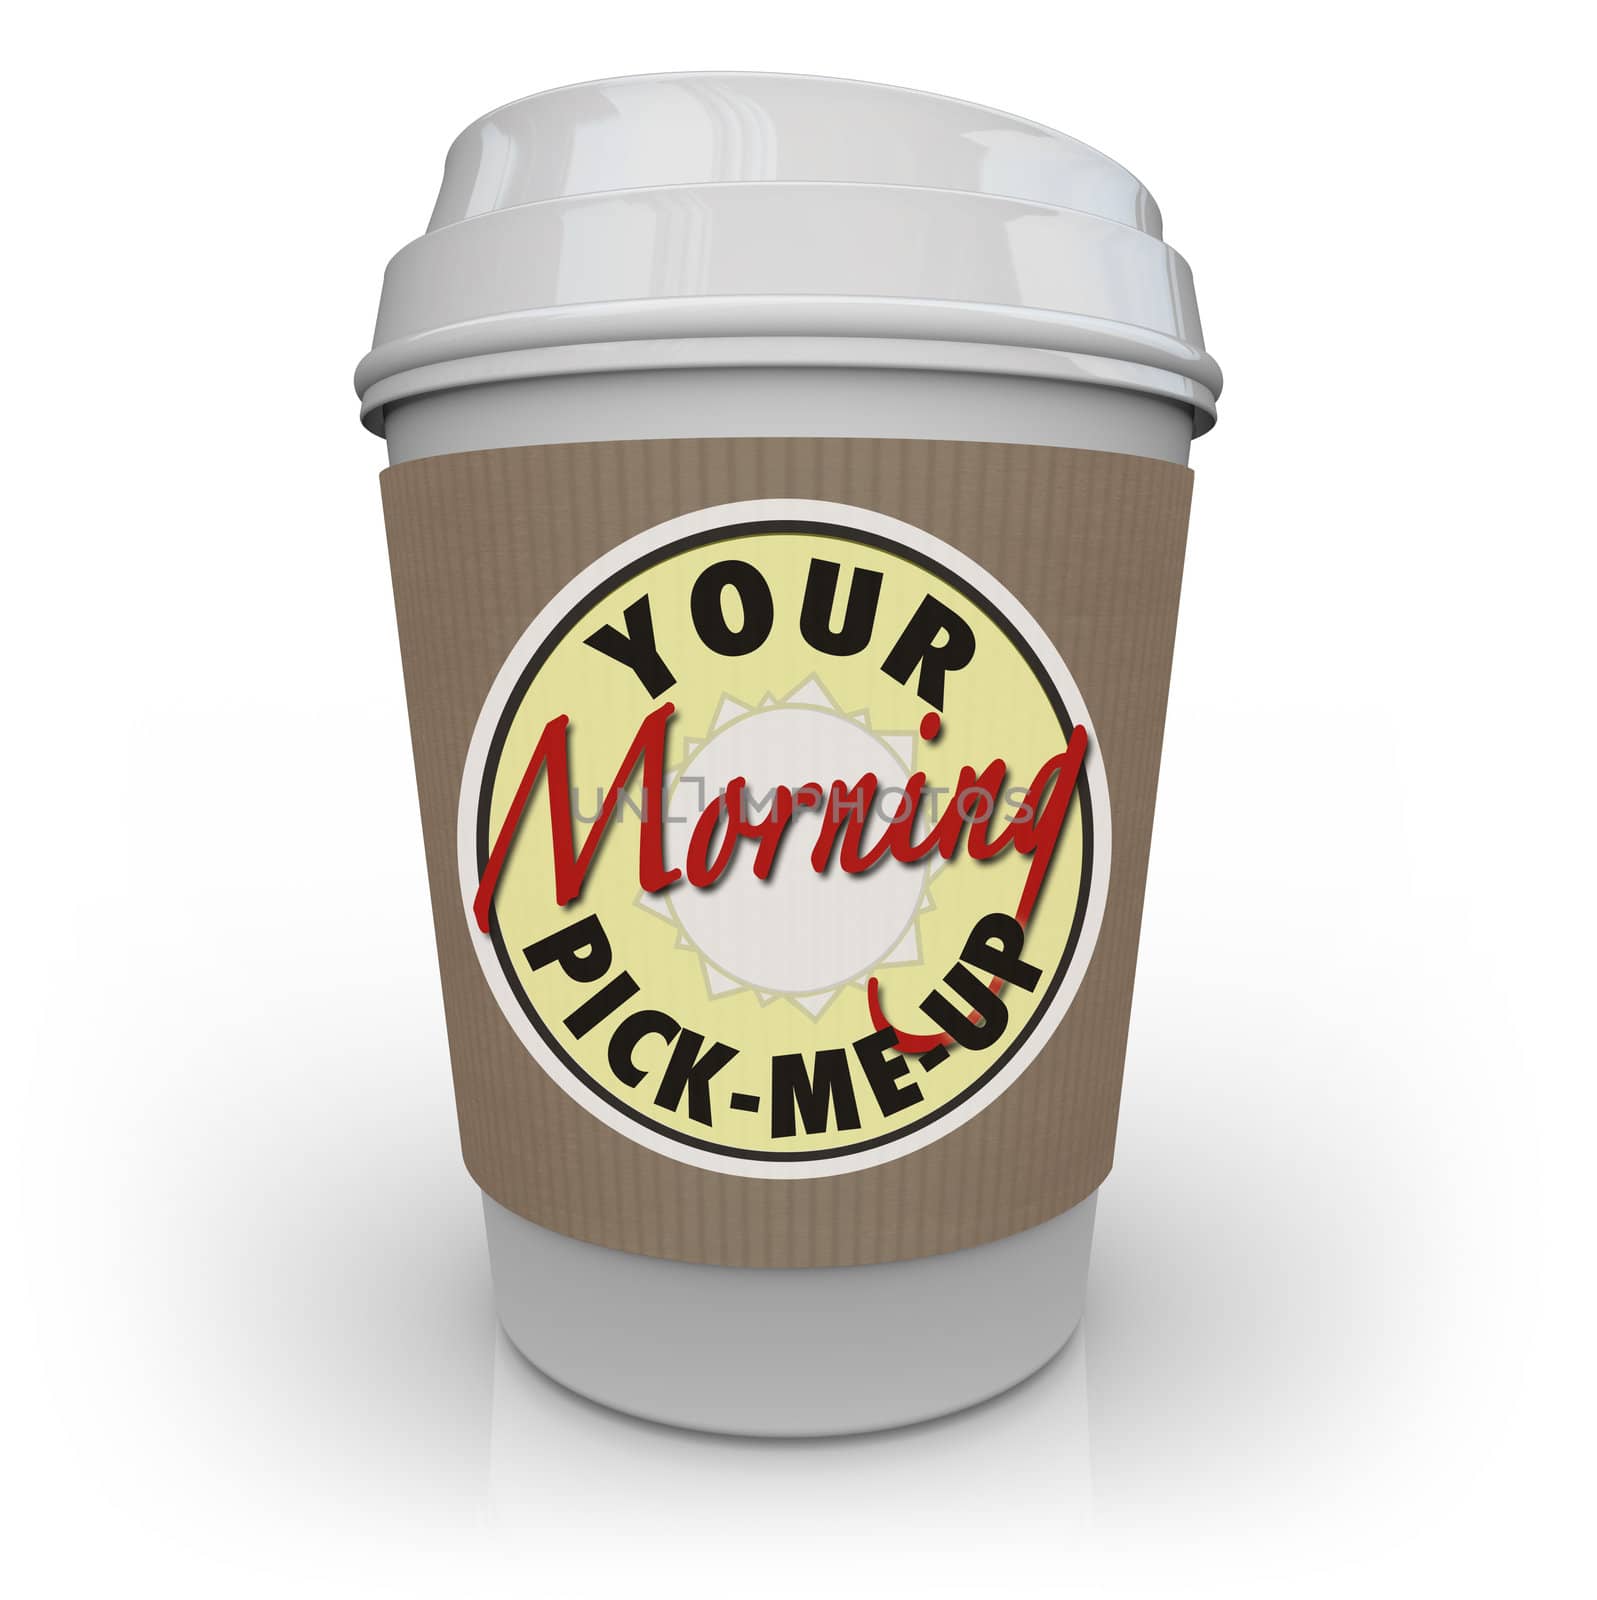 A cup of coffee from a store or restaurant with a holder sleeve and logo with words reading Your Morning Pick-Me-Up to provide a jolt of caffeine to wake you up